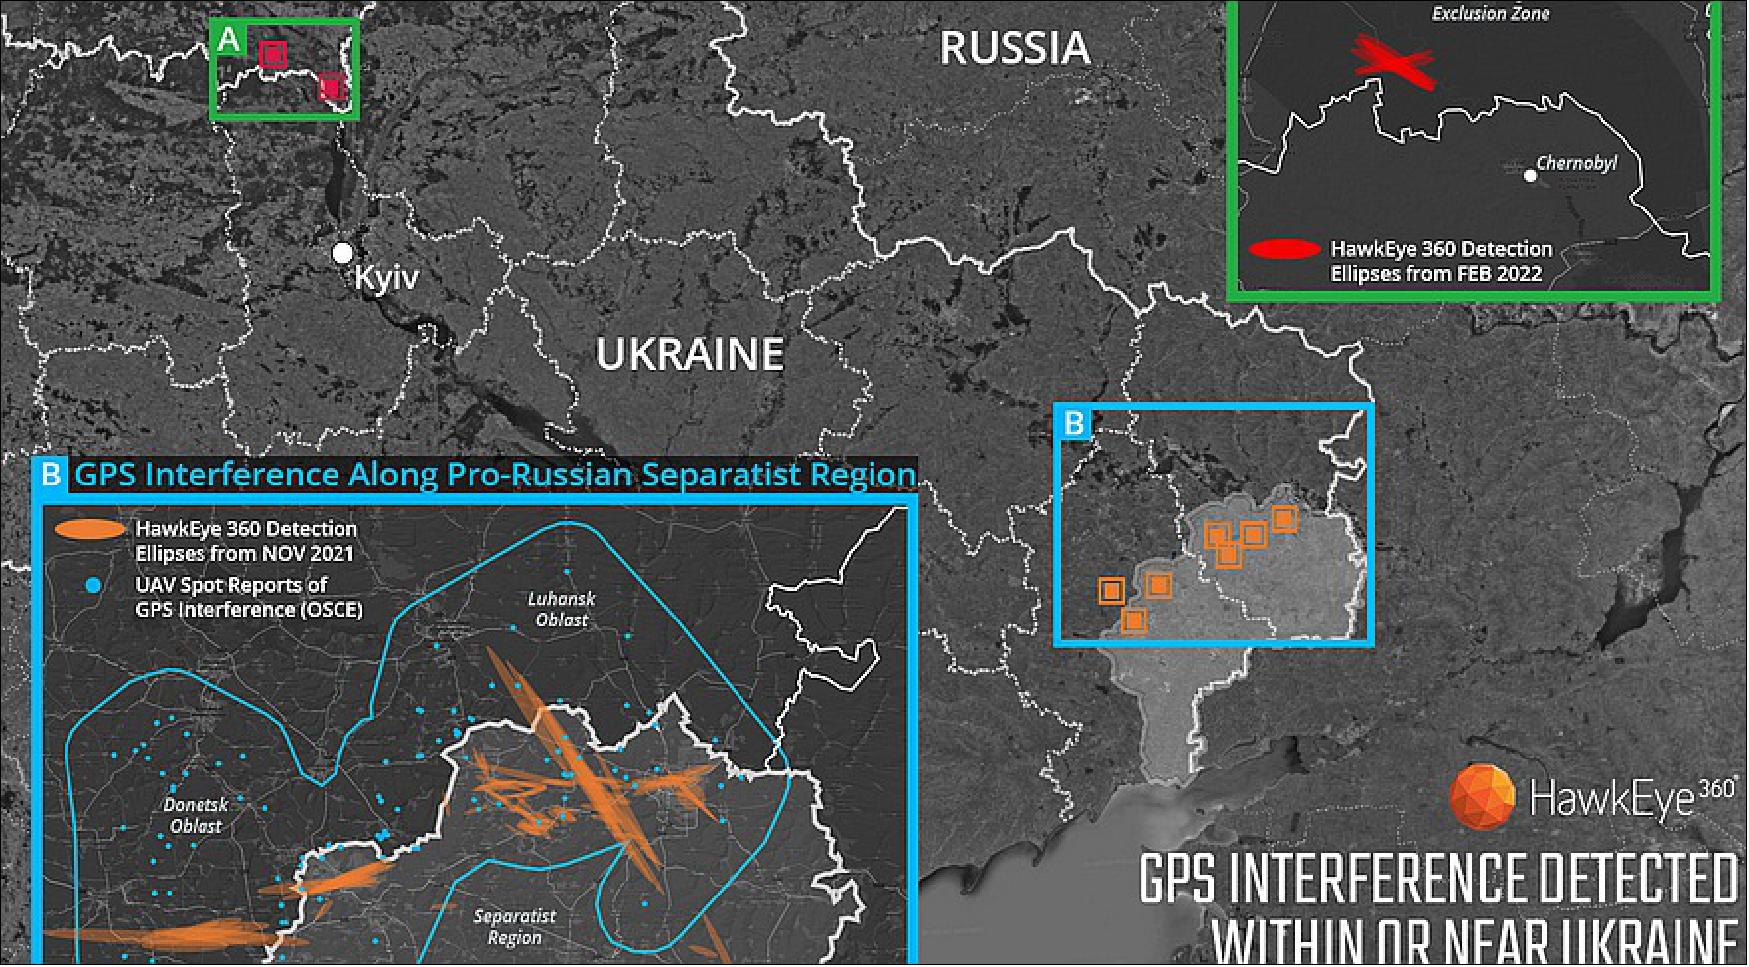 Figure 12: HawkEye 360 detected increased GPS interference in and around Ukraine in the months leading up to the Russian invasion (image credit: HawkEye 360)